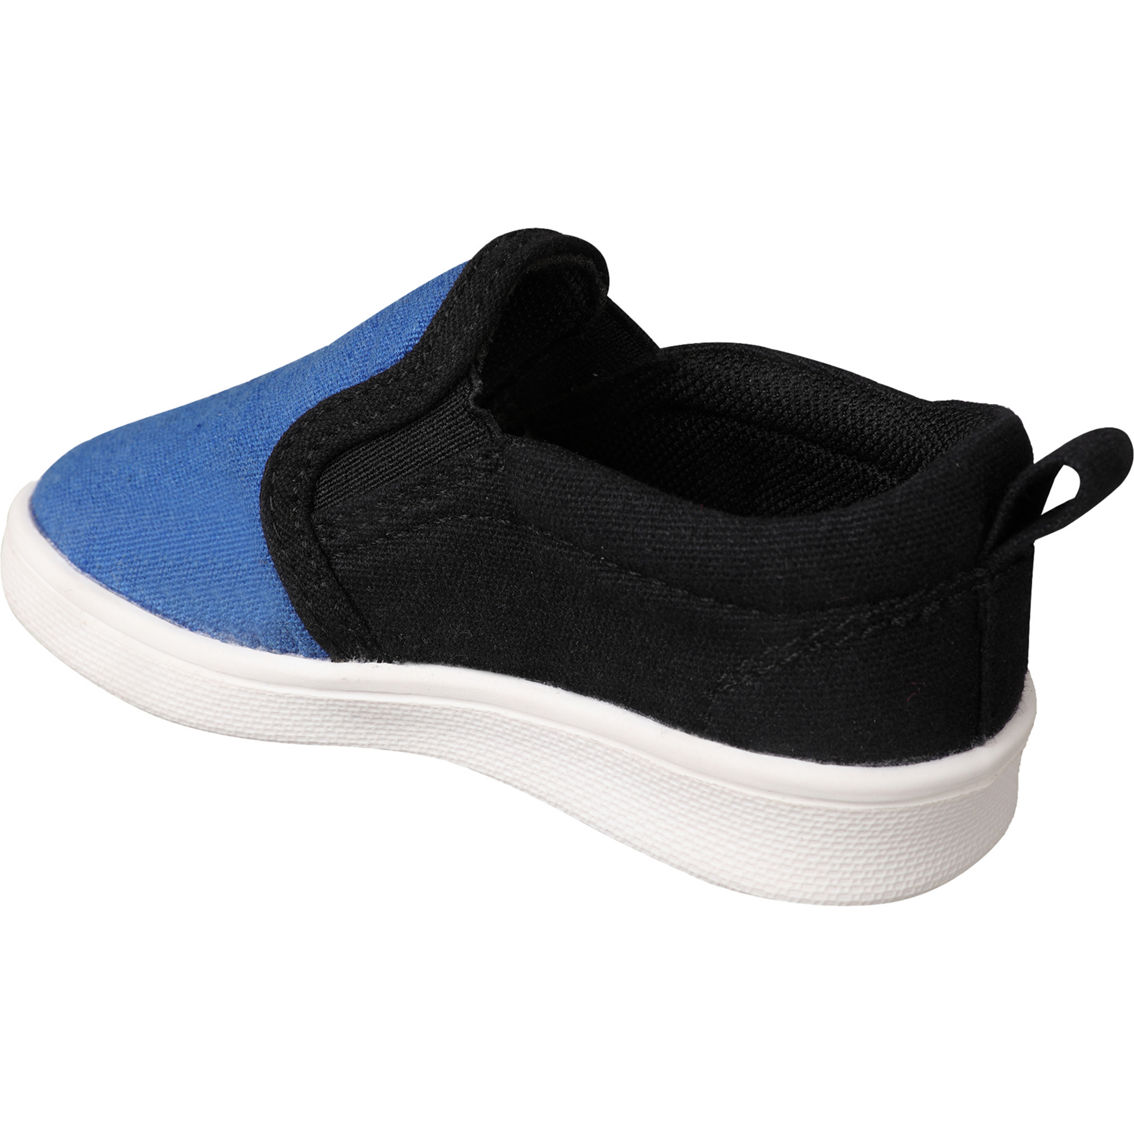 Oomphies Baby Boys Rascal Hard Sole Crib Shoes - Image 3 of 4